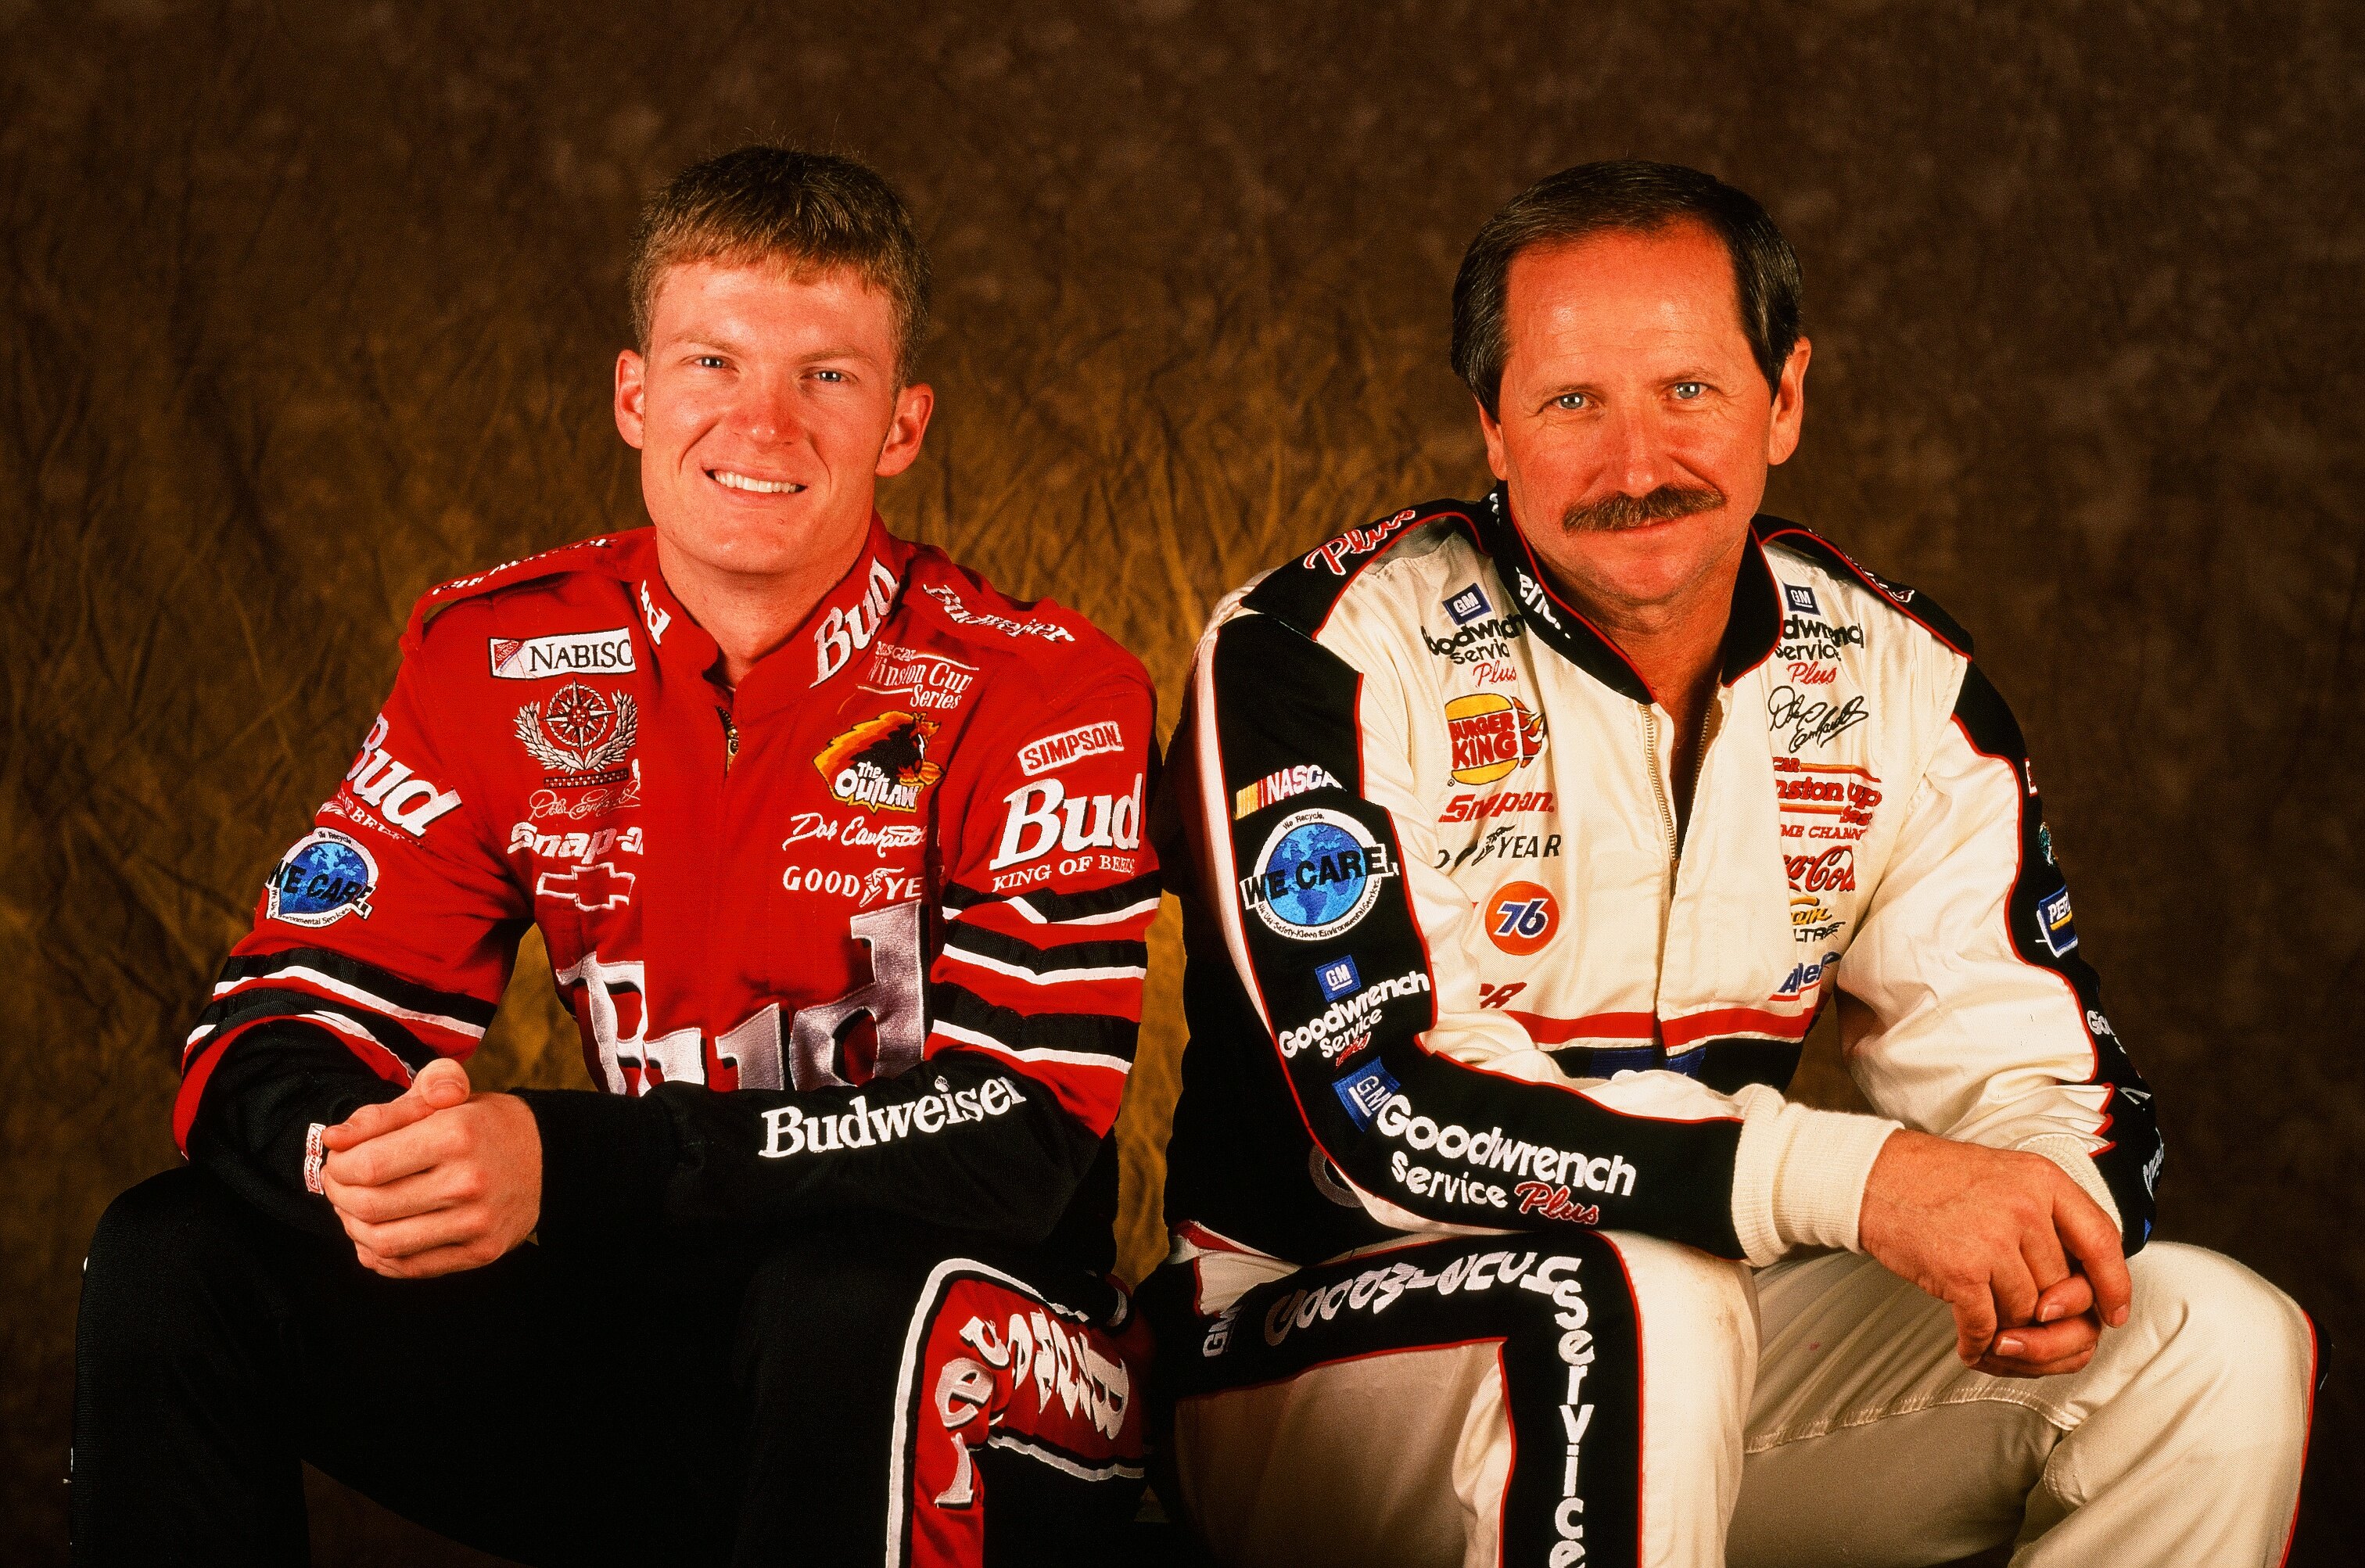 Dale Earnhardt Jr. got some simple advice from his father that has paid off.